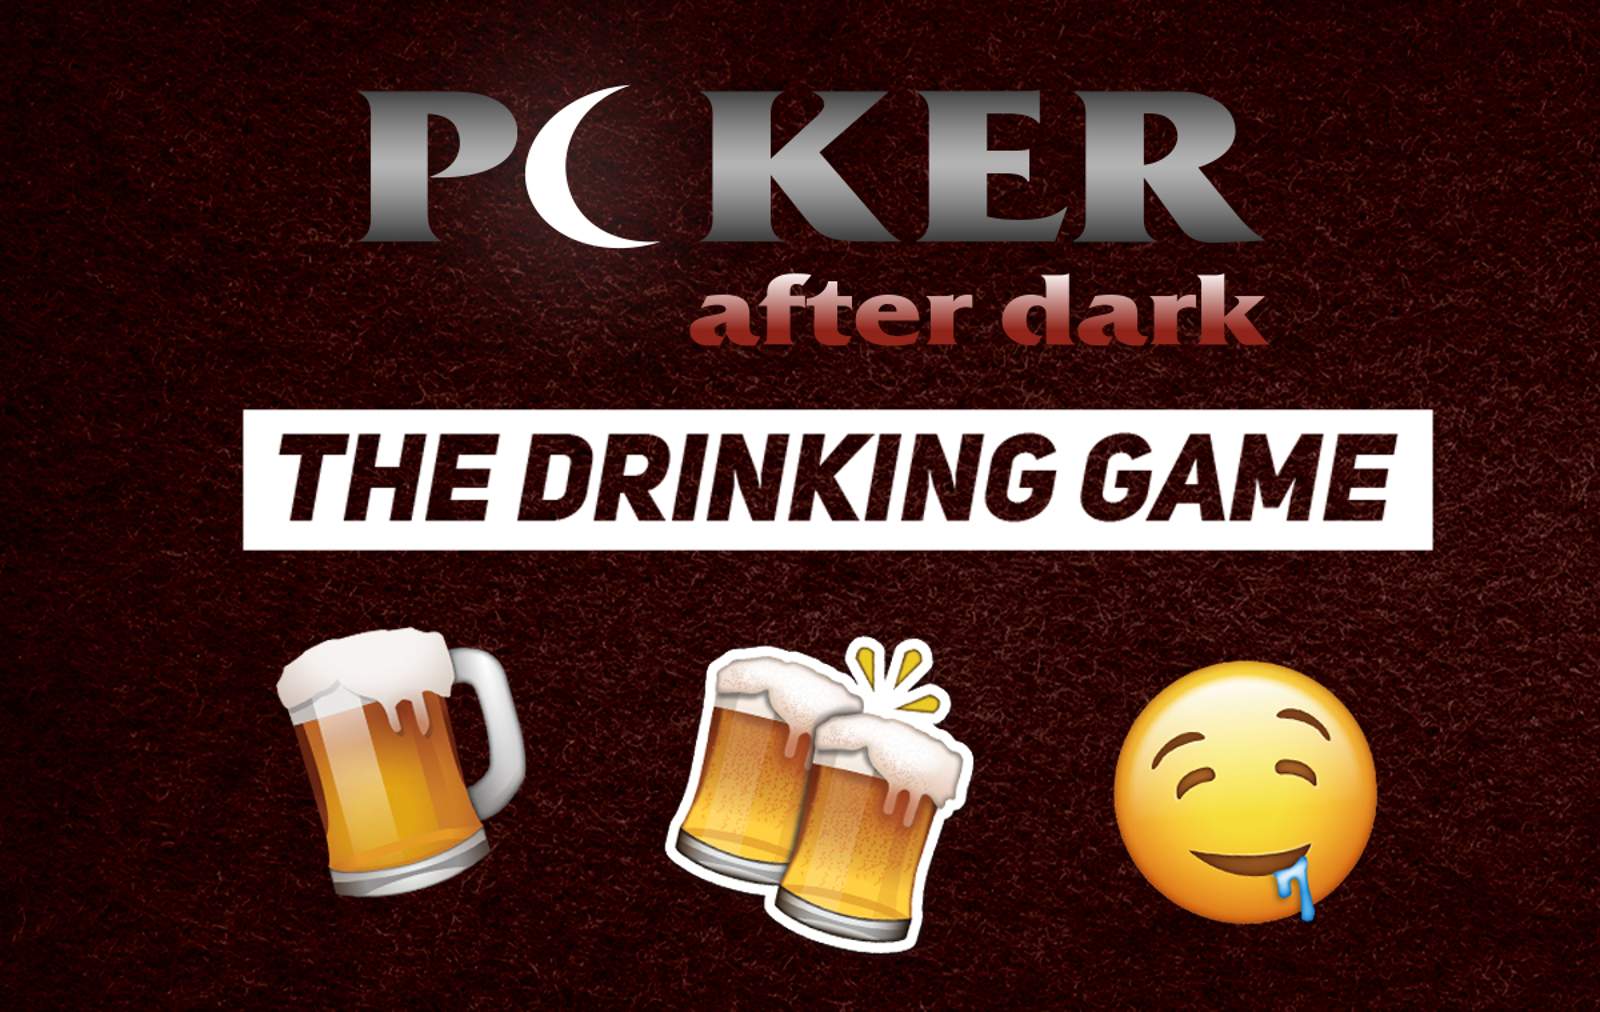 "Poker After Dark": The Drinking Game